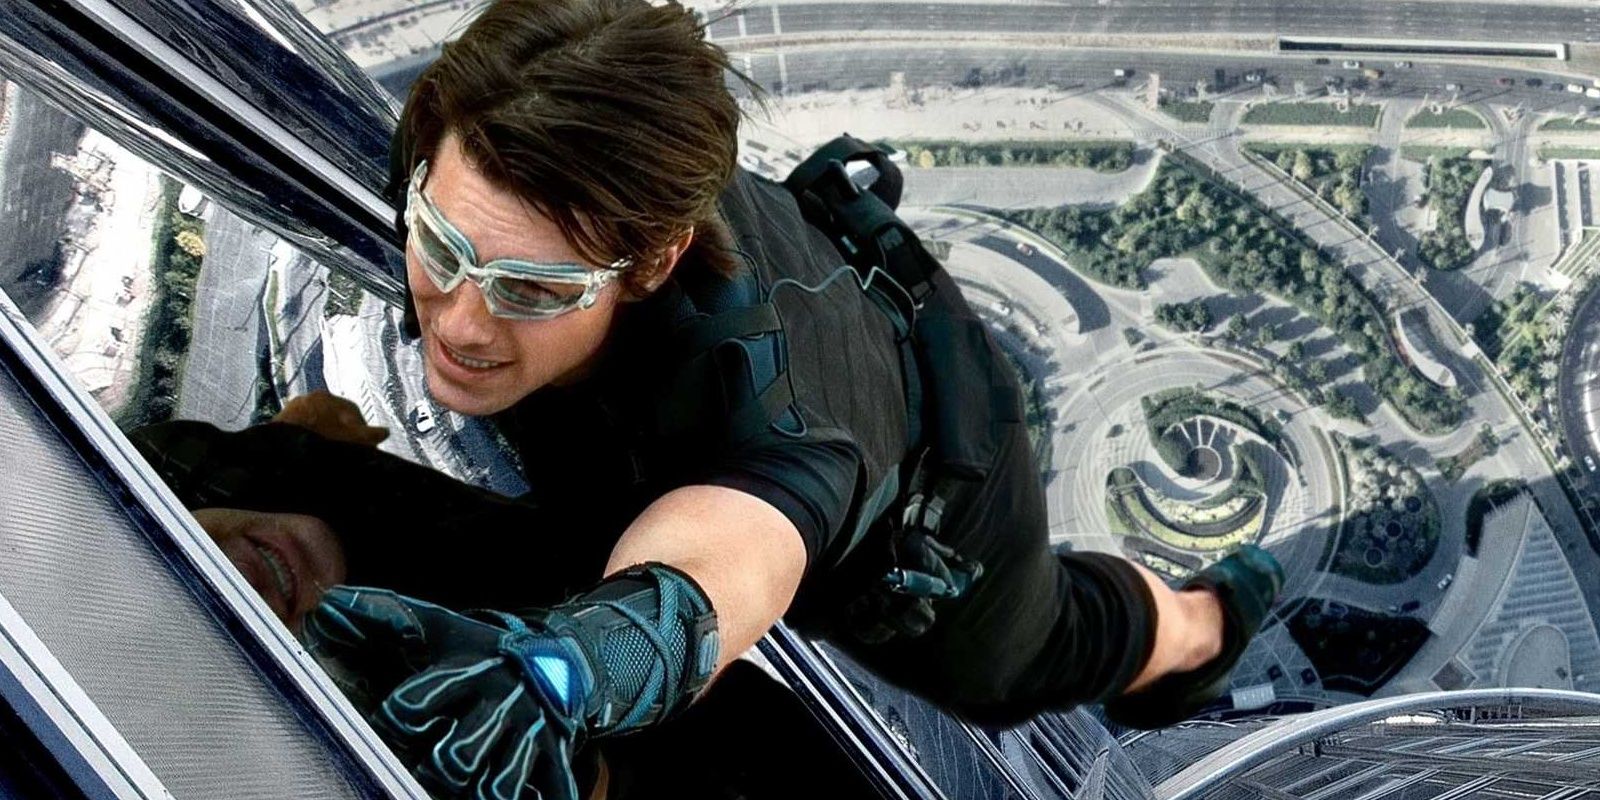 Mission: Impossible Sequels Will Have Tom Cruise Doing Even More Dangerous Stunts